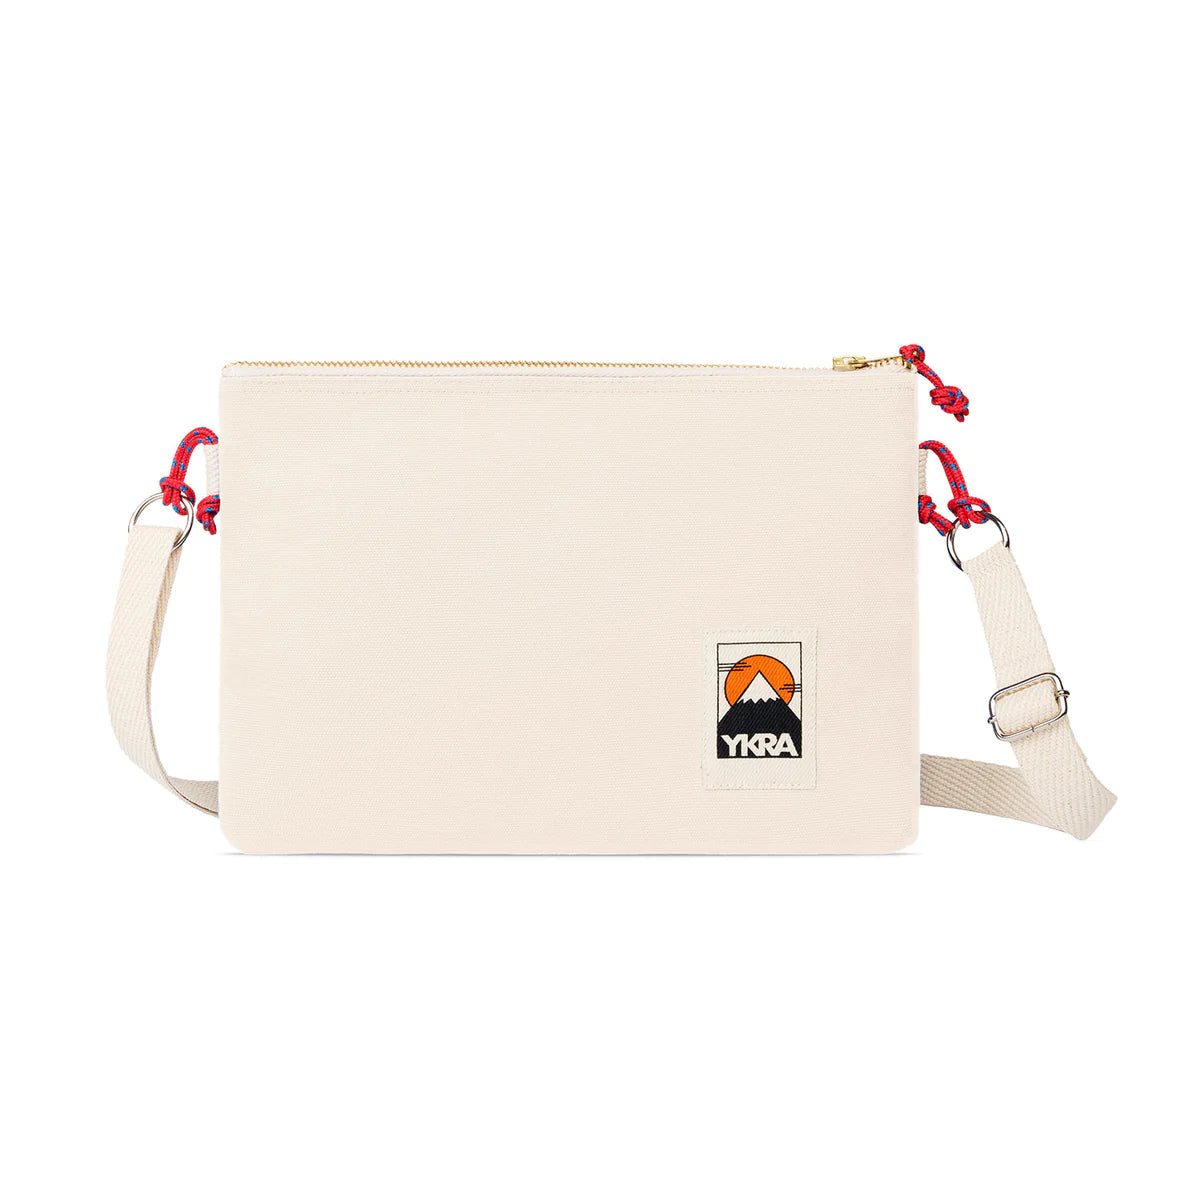 Side Pouch in White by YKRA